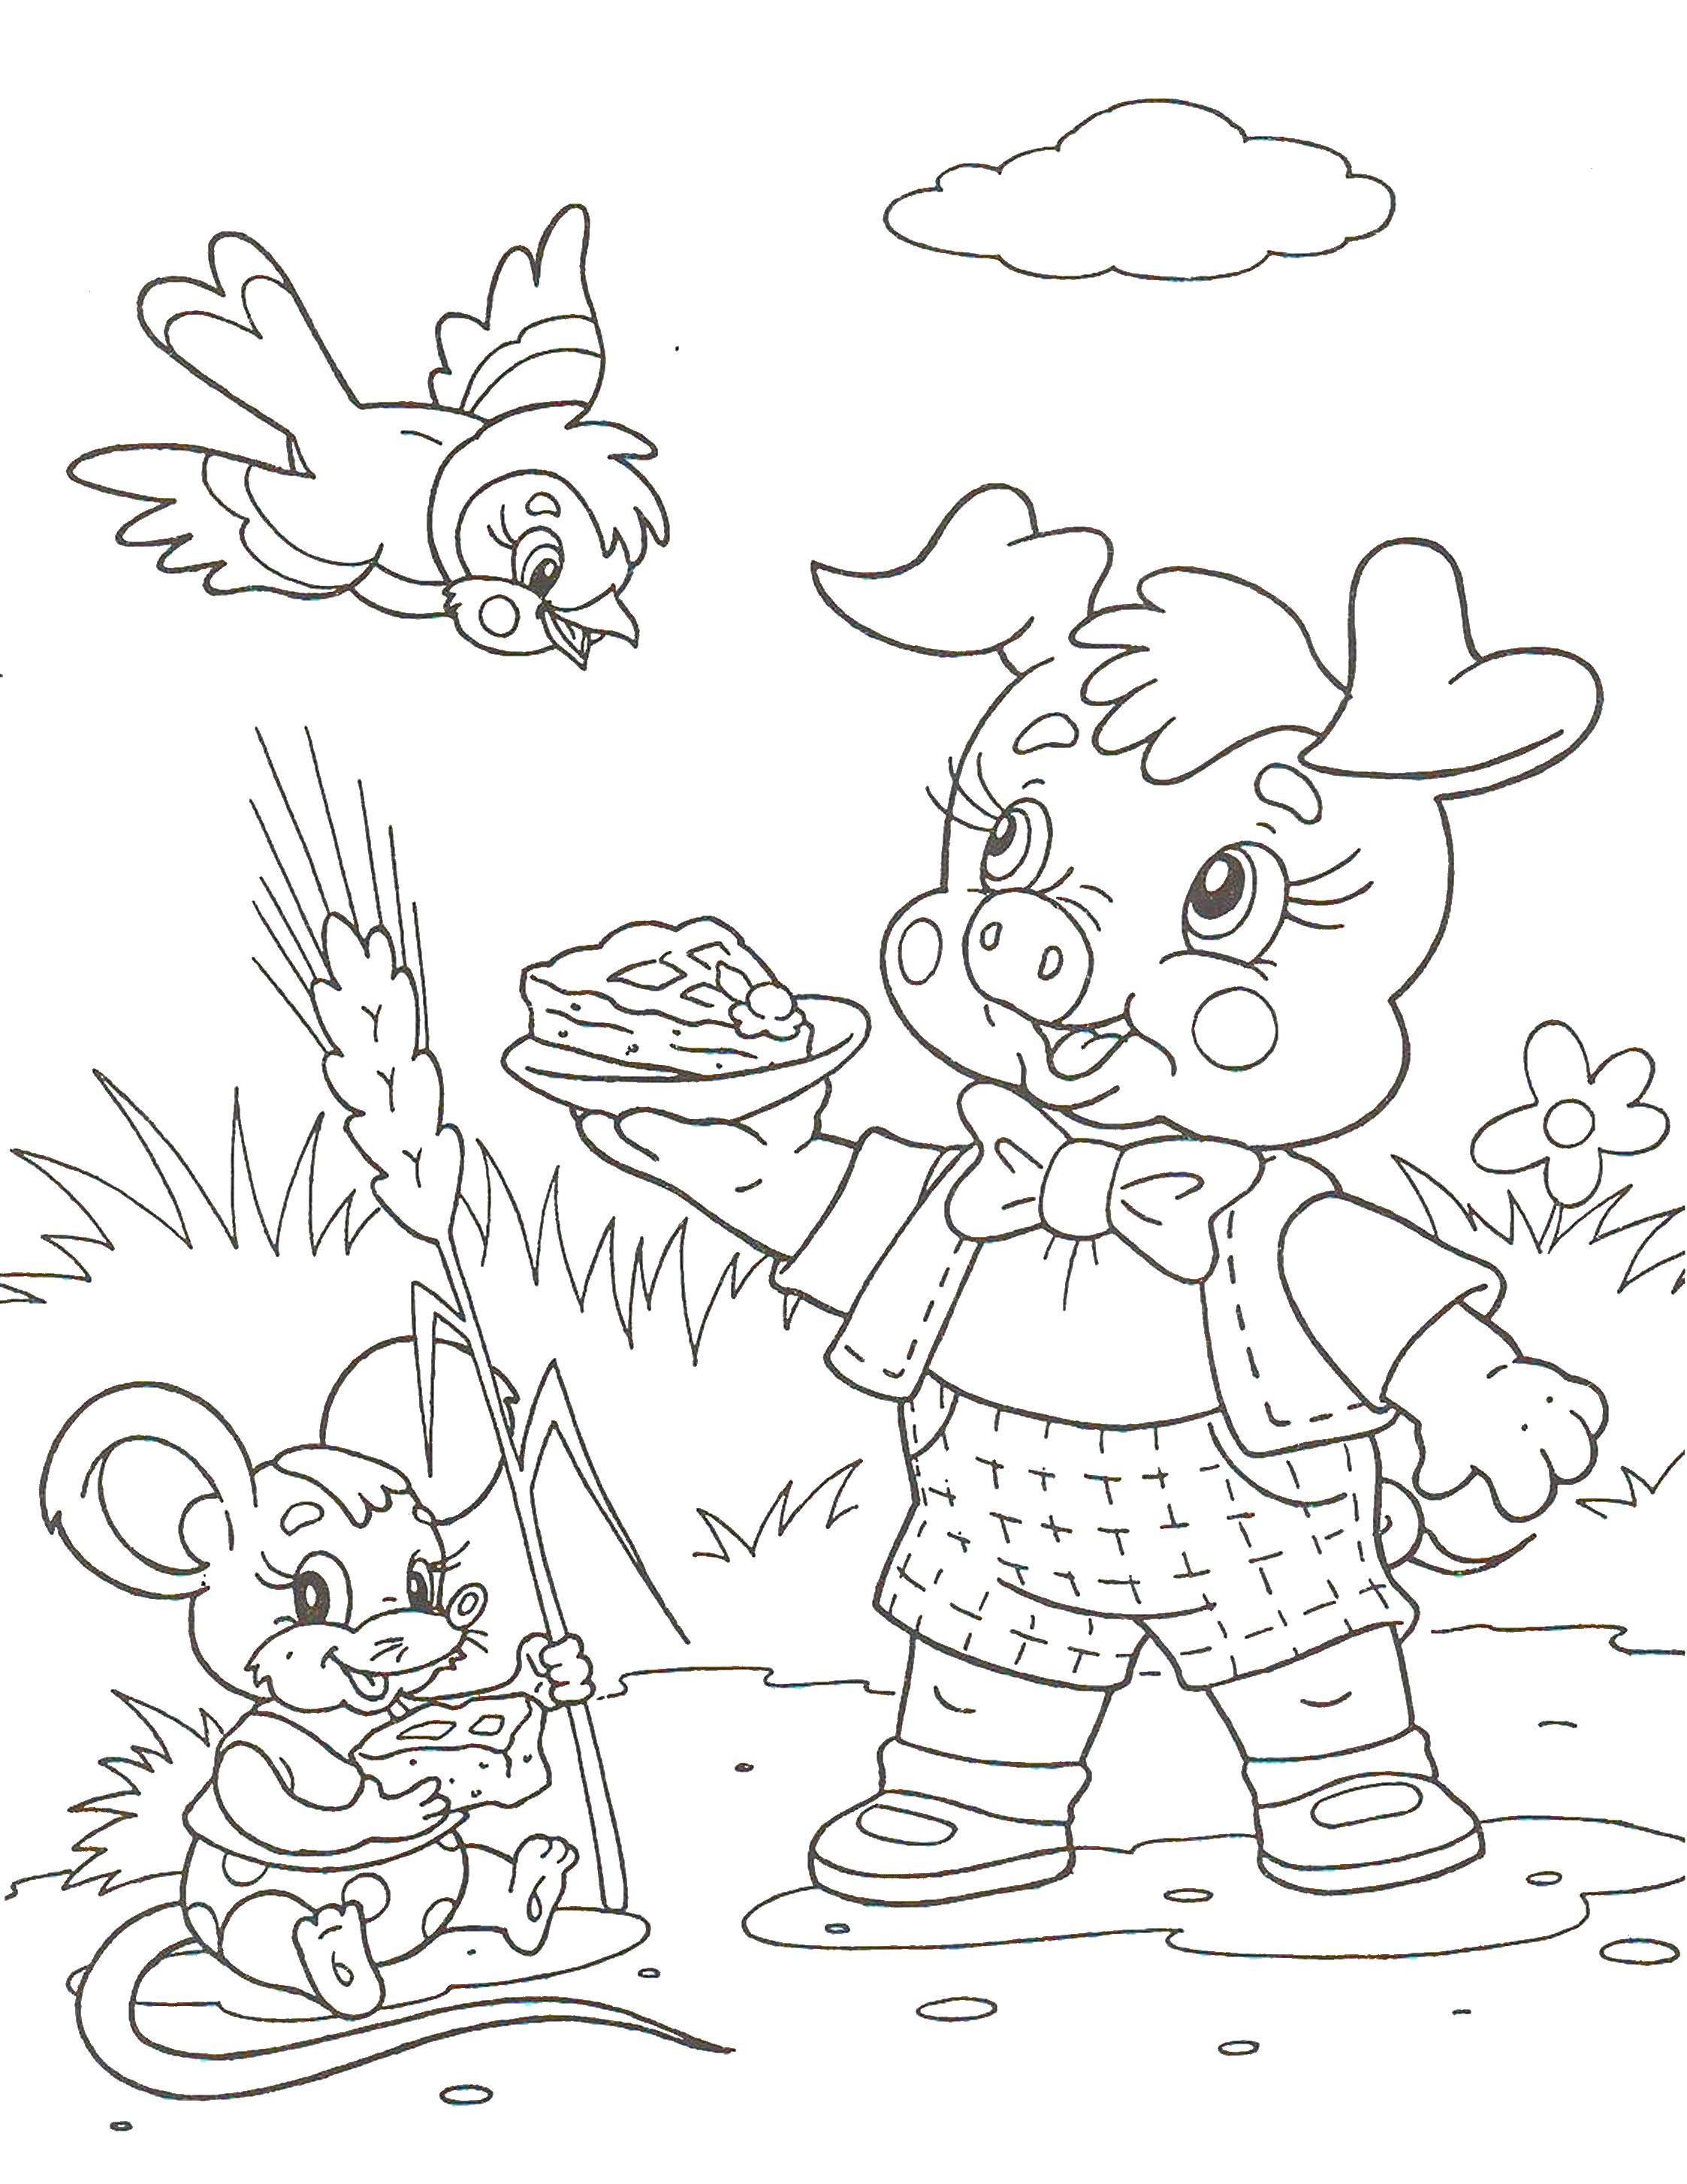 Coloring Pig wheway bird. Category Fairy tales. Tags:  pig, wolf.